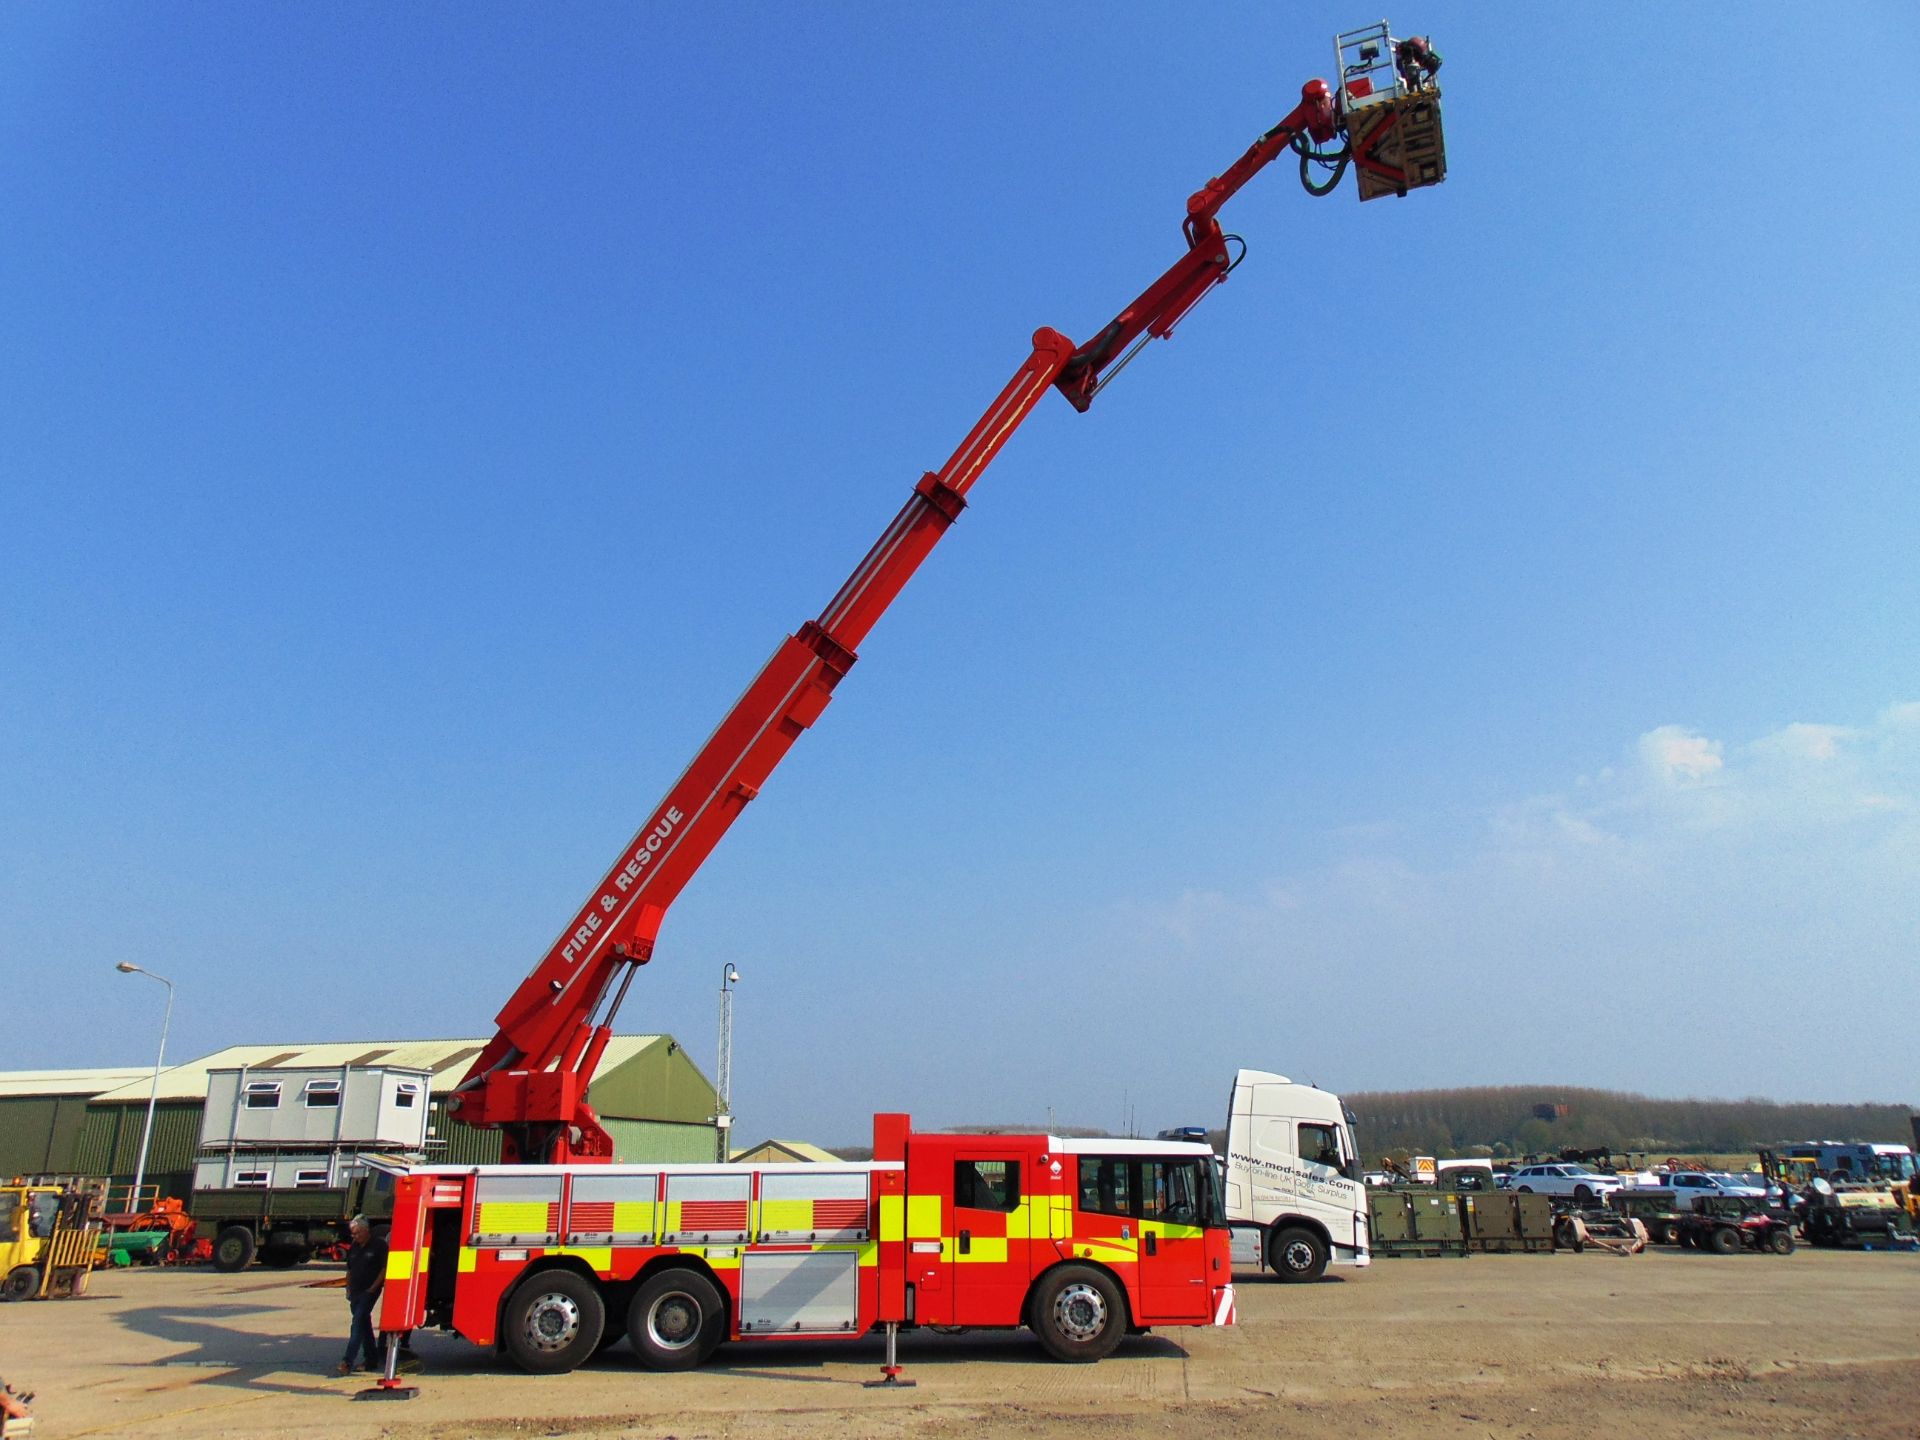 2008 Mercedes Econic CARP (Combined Aerial Rescue Pump) 6x2 Aerial Work Platform / Fire Appliance - Image 5 of 49